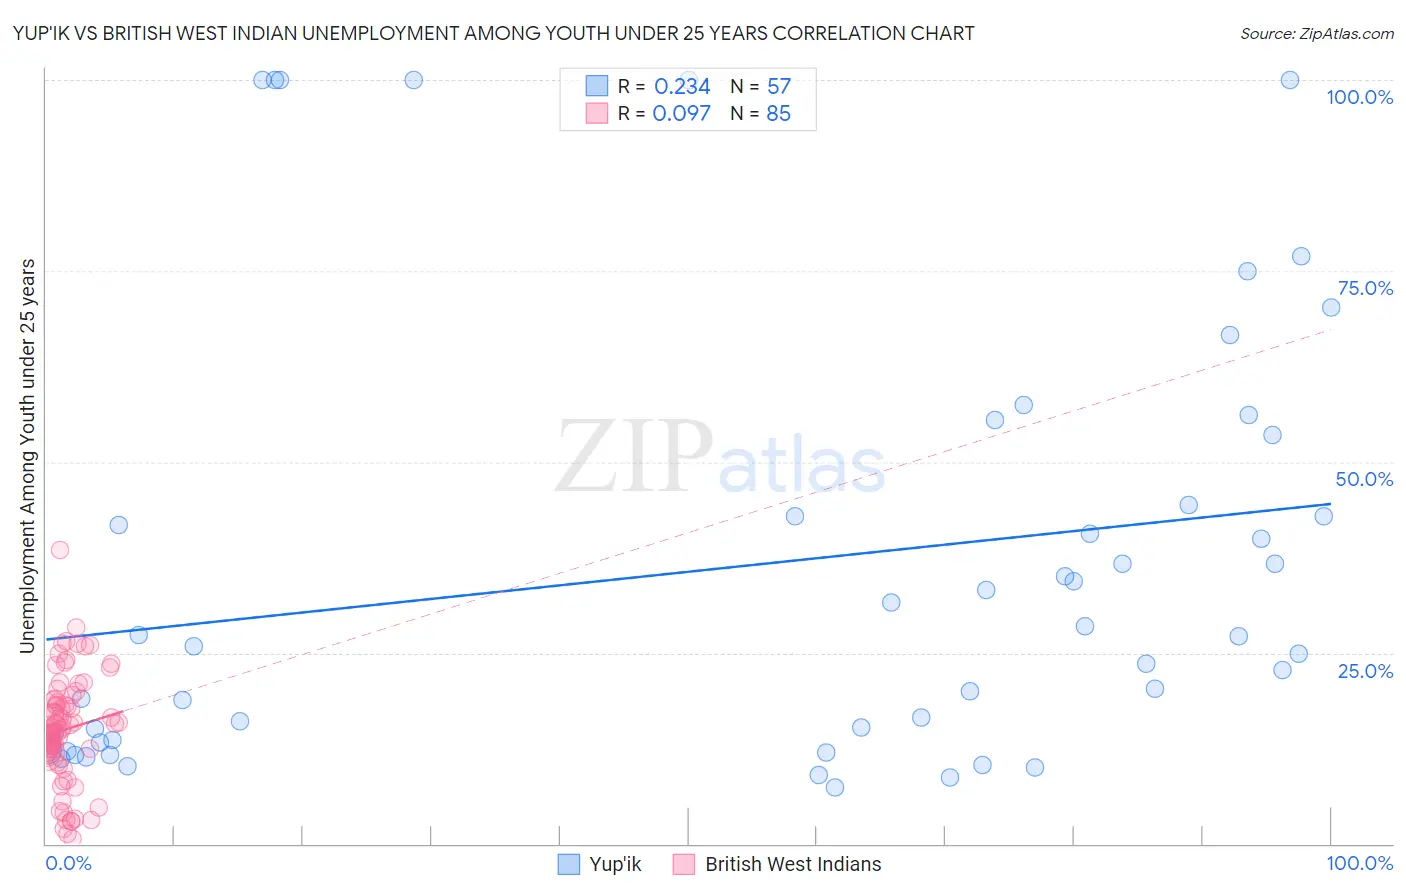 Yup'ik vs British West Indian Unemployment Among Youth under 25 years